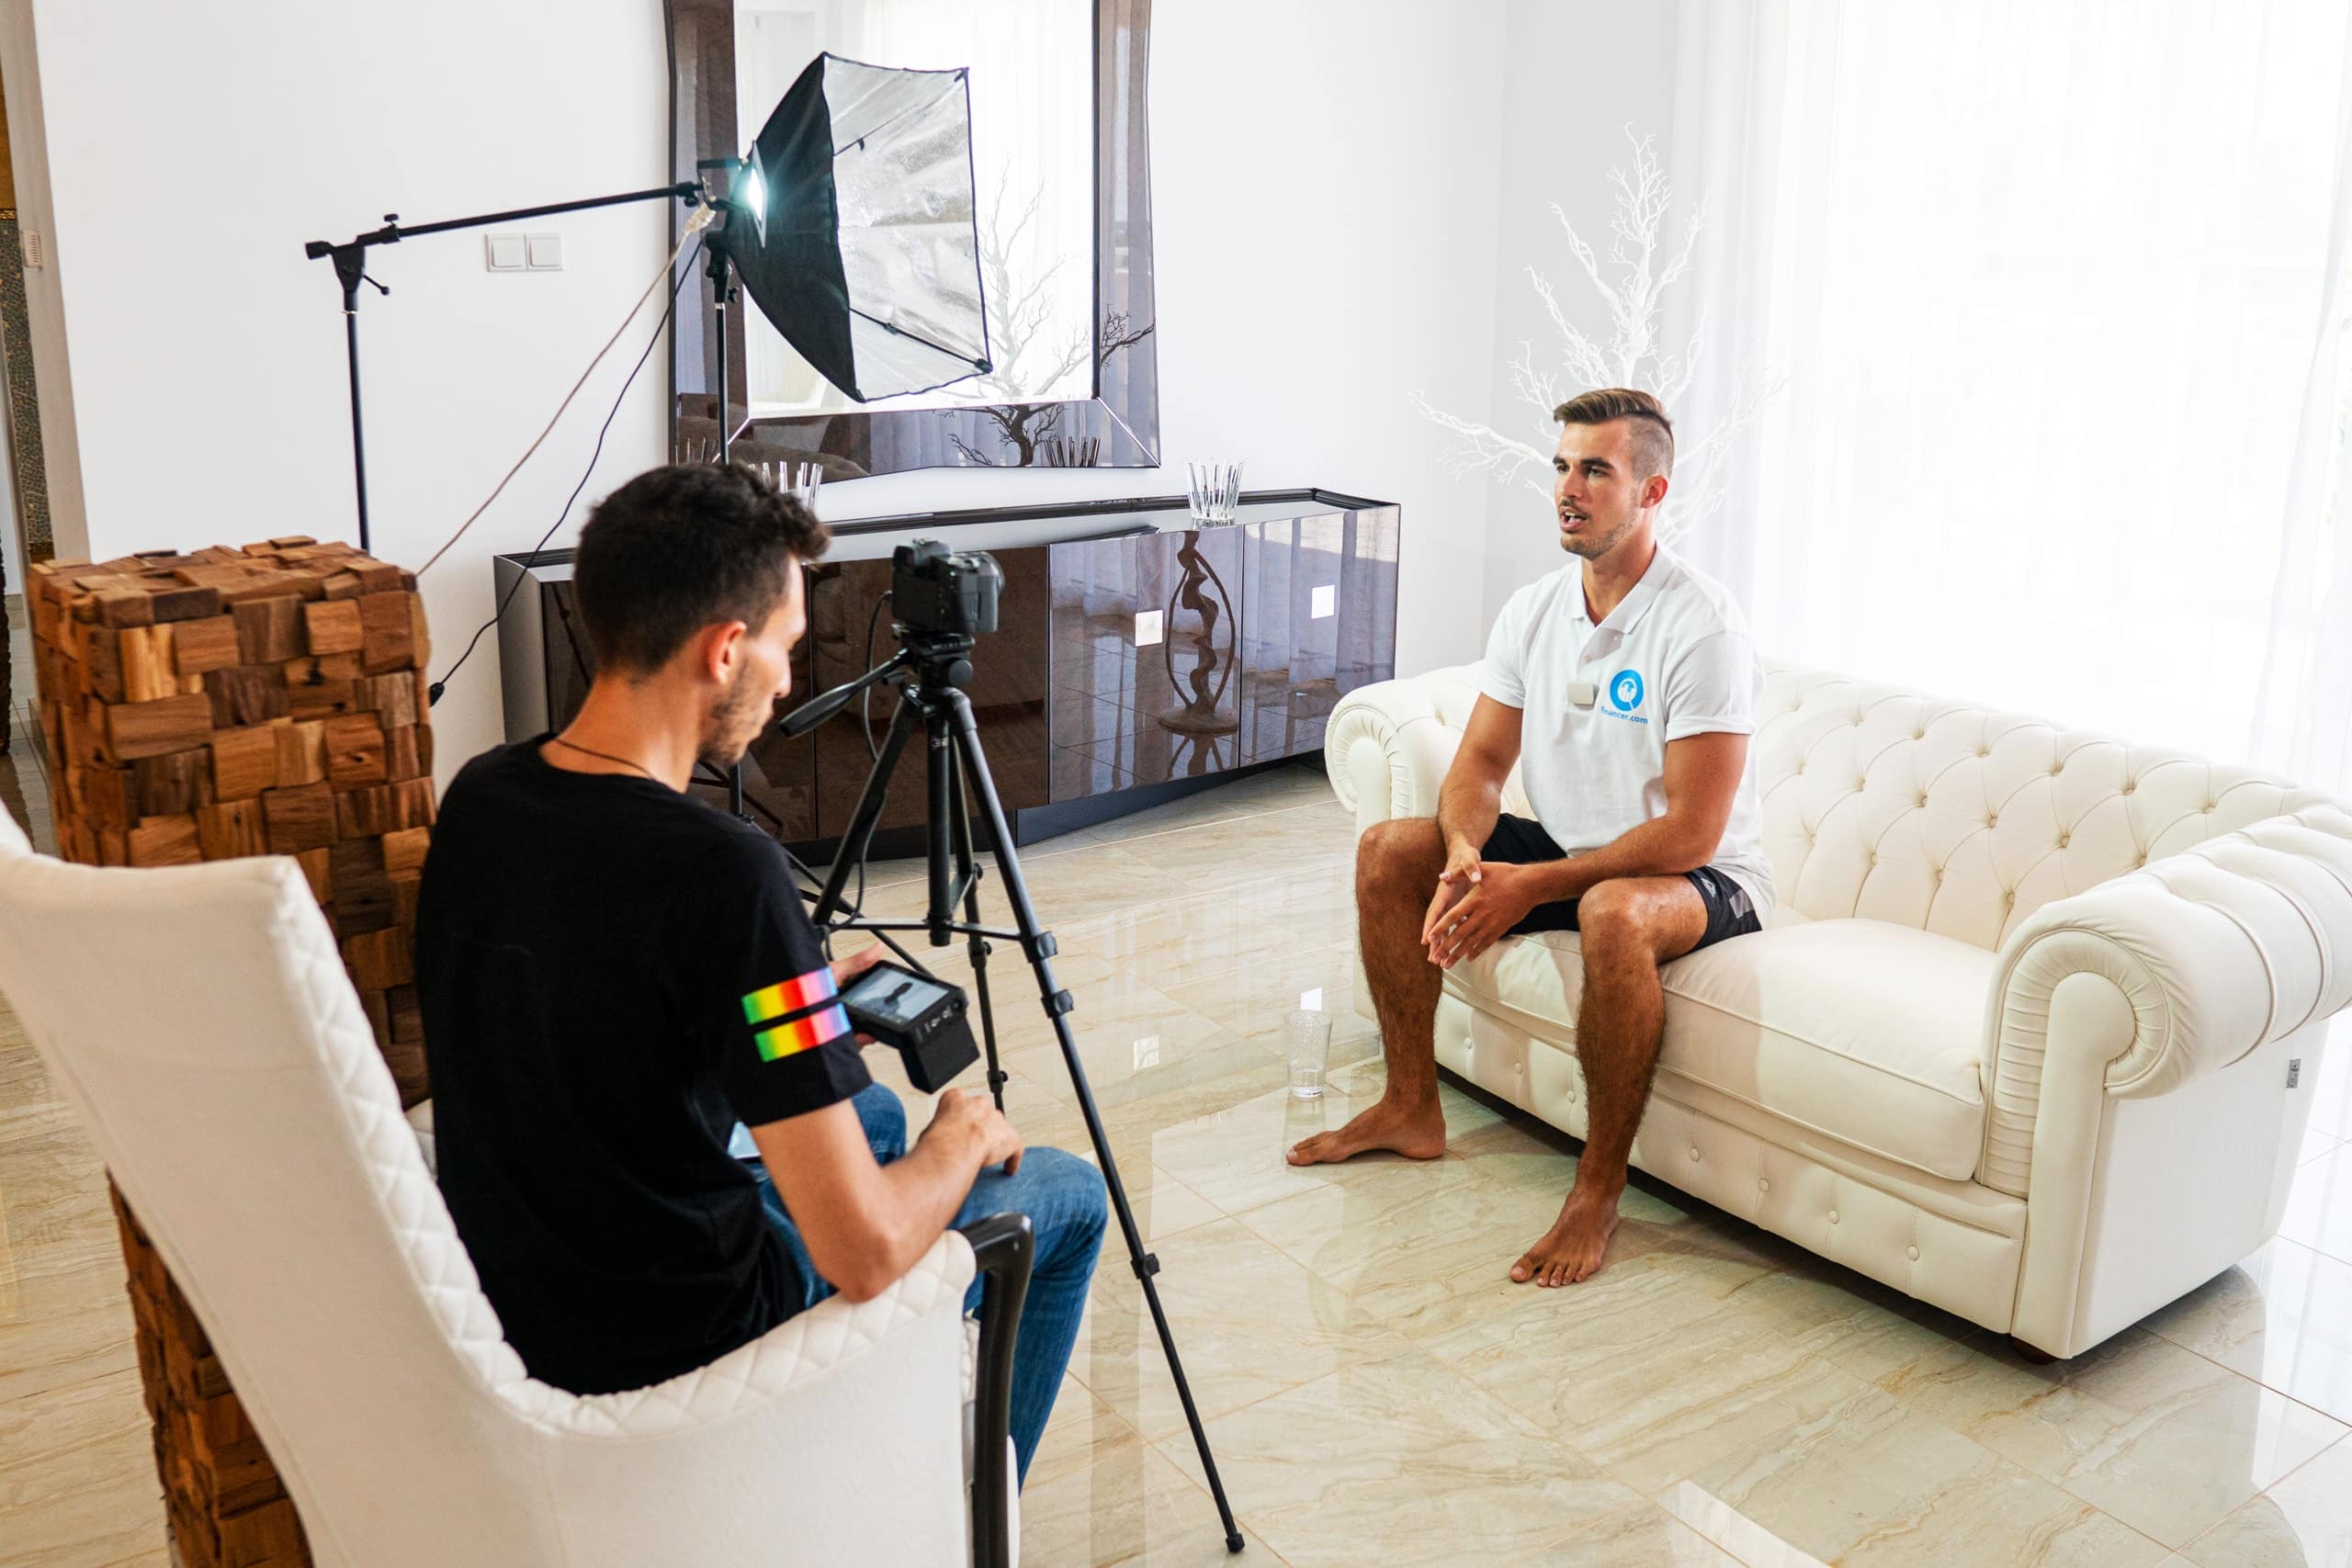 Videoshooting sessions at the villa